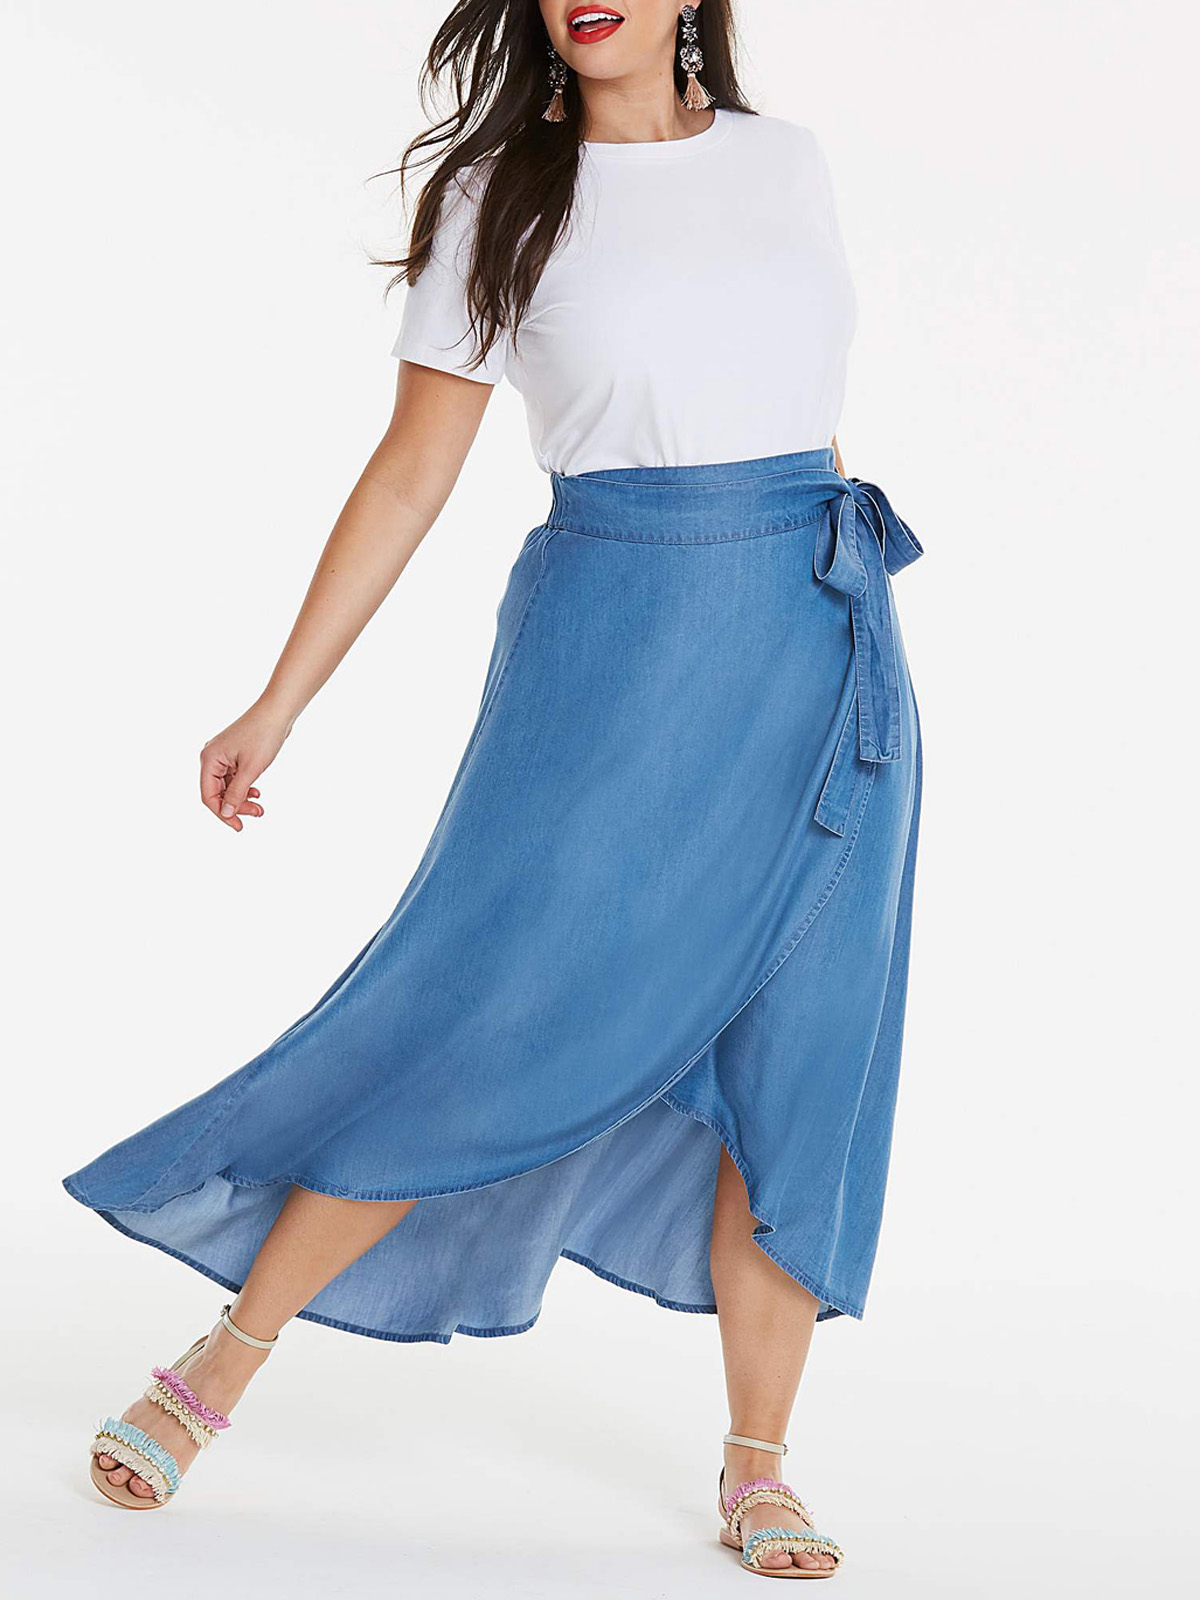 Plus Size Wholesale Clothing By Simply Be Simplybe Mid Blue Soft Tencel Denim Floaty Wrap 8864